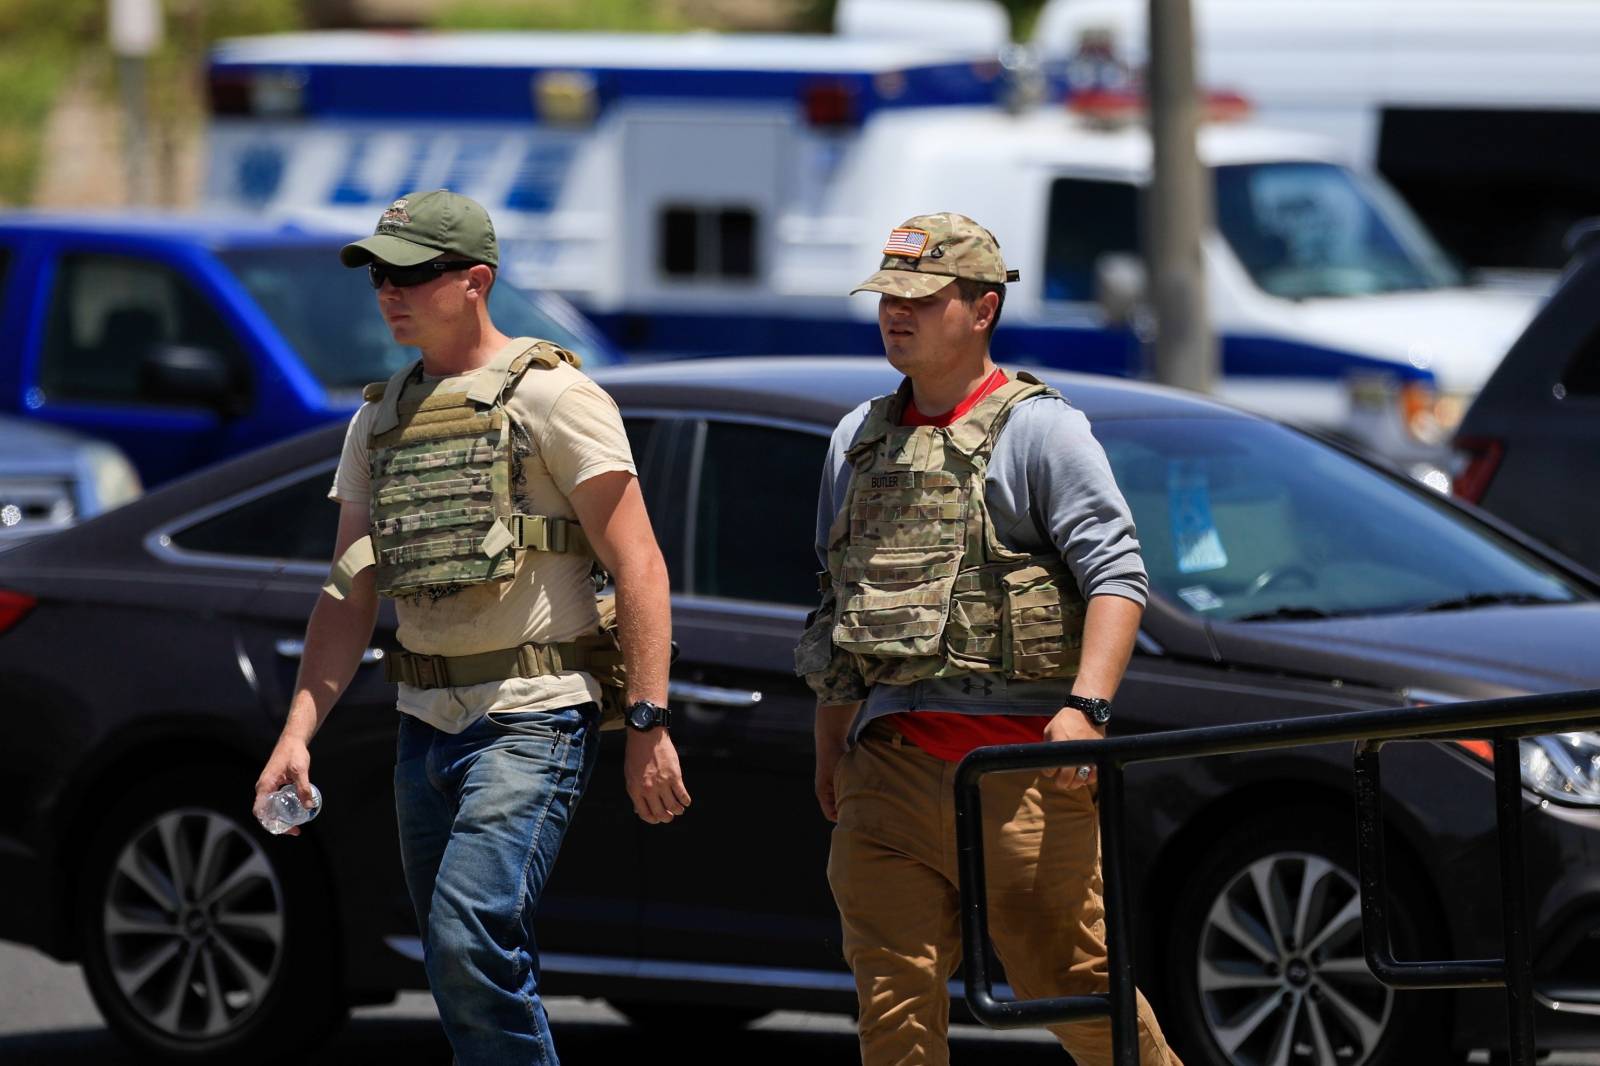 Police arrive after a mass shooting at a Walmart in El Paso